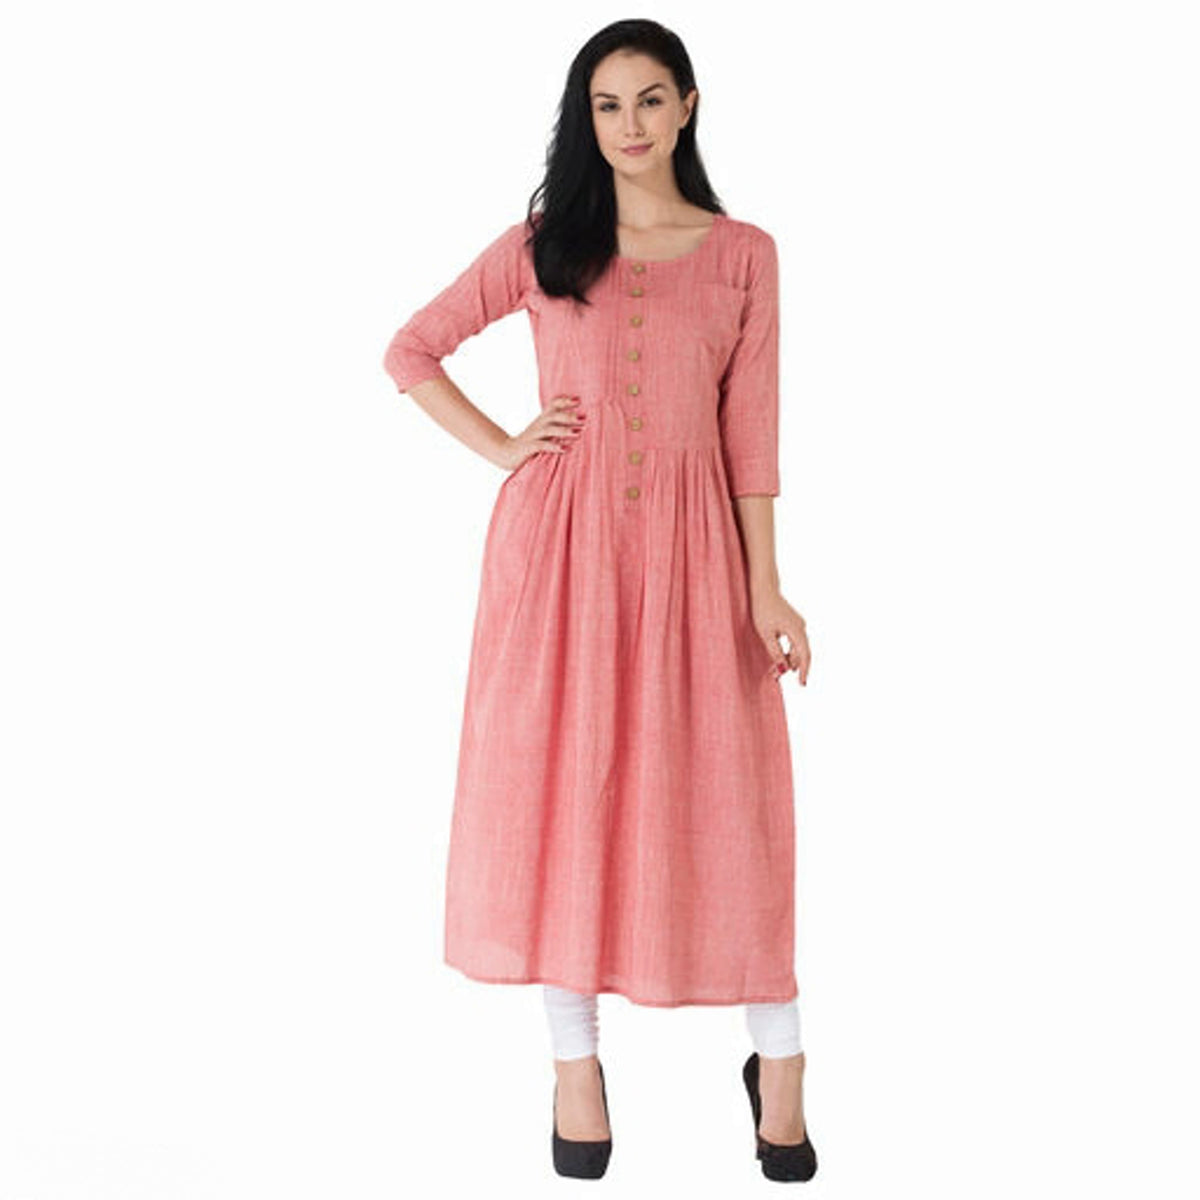 Buy Super net kurti with bell design fringes (Pink, Medium) at Amazon.in